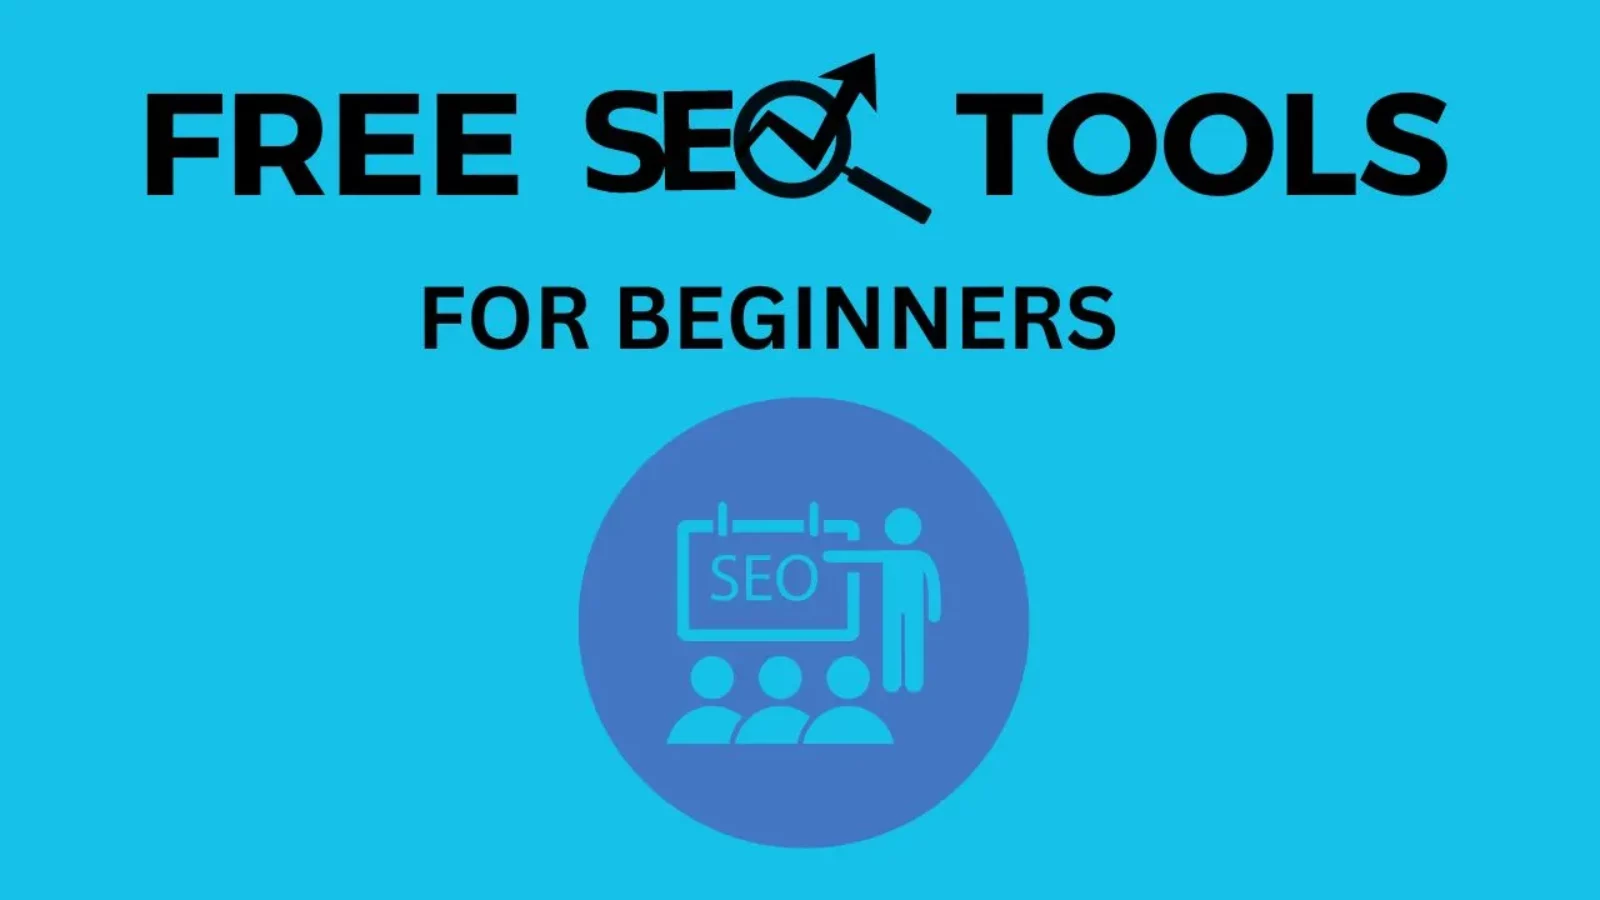 Free SEO Tools for Beginners